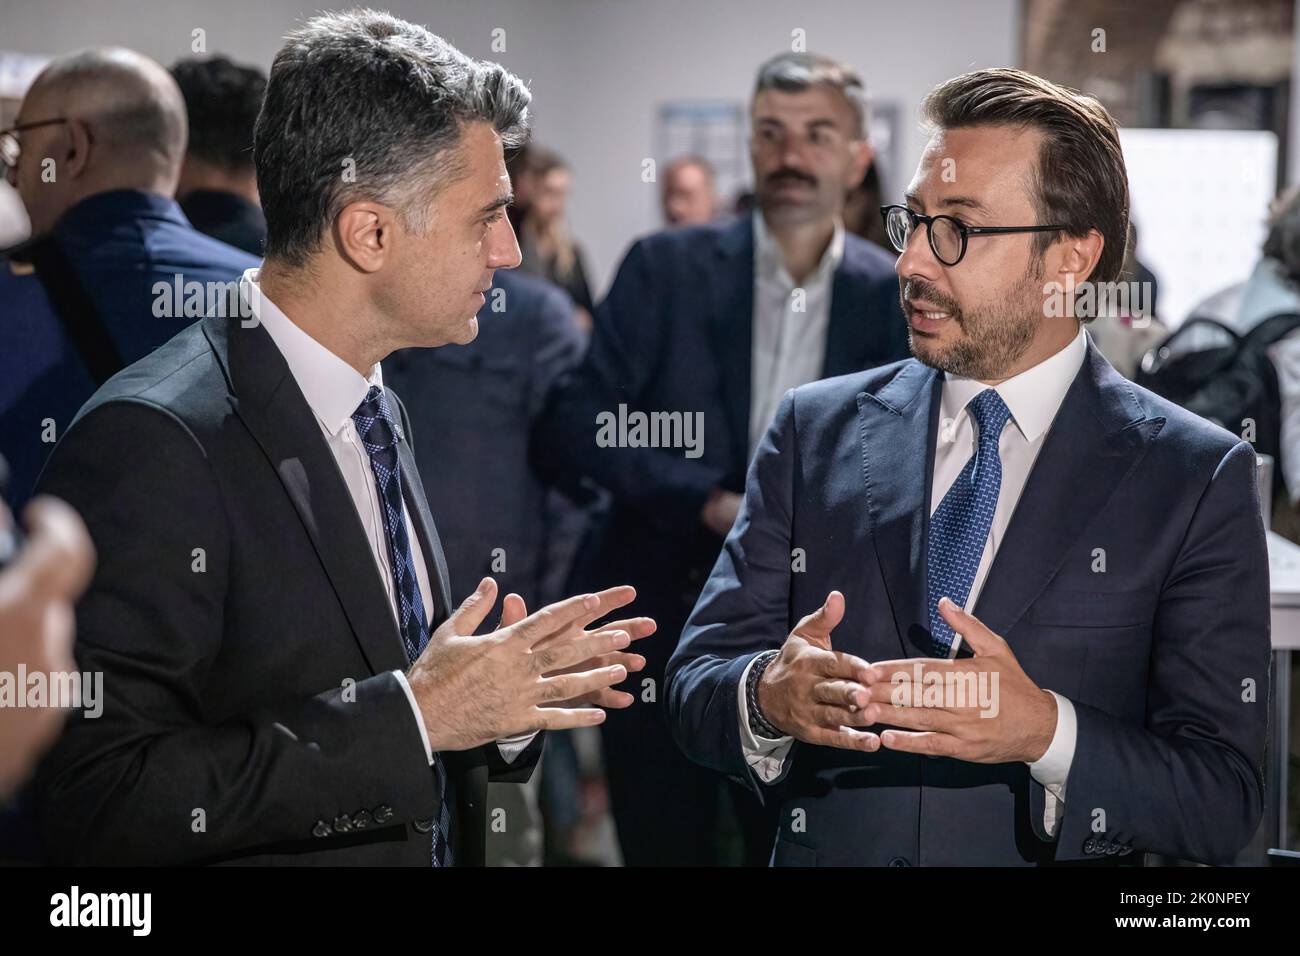 Istanbul, Turkey, 12/09/2022, Anadolu Agency General Manager Serdar Karagoz (right) and Anadolu Agency Visual News Editor Firat Yurdakul (left) seen evaluating photographs at the Istanbul Photo Awards 2022 exhibition. Istanbul Photo Awards 2022 Exhibition At Mimar Sinan Fine Arts University Tophane-i Amire Culture and Art Center, at the Single Dome building, with the participation of Anadolu Agency General Manager Serdar Karagoz, after the opening speech, Mimar Sinan Fine Arts University Rector Prof. Dr. Handan ?nci Elci opened with the presence of Beyoglu Mayor Haydar Ali Yildiz and guests. A Stock Photo